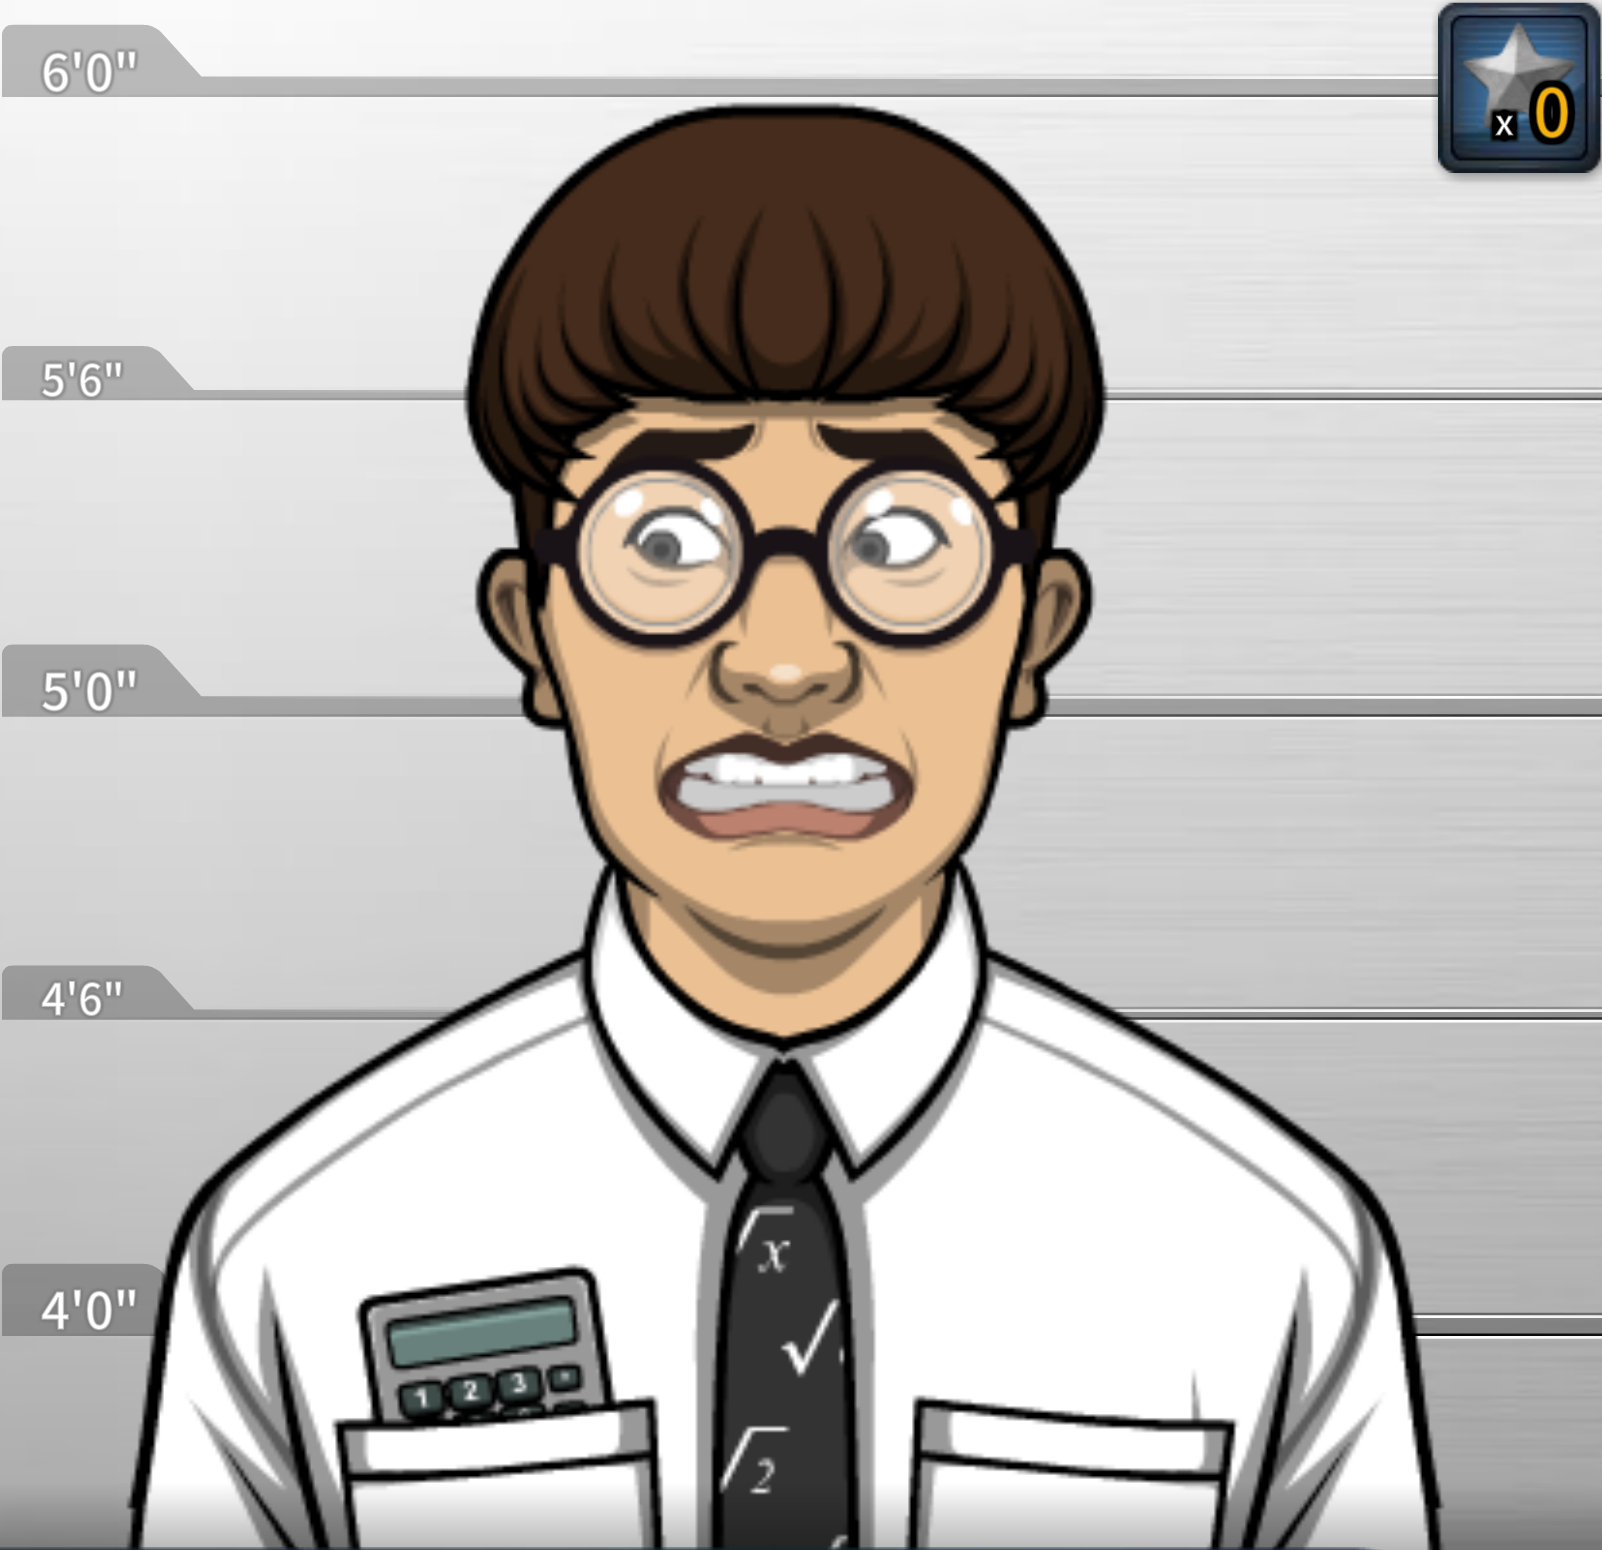 how many levels in criminal case pacific bay